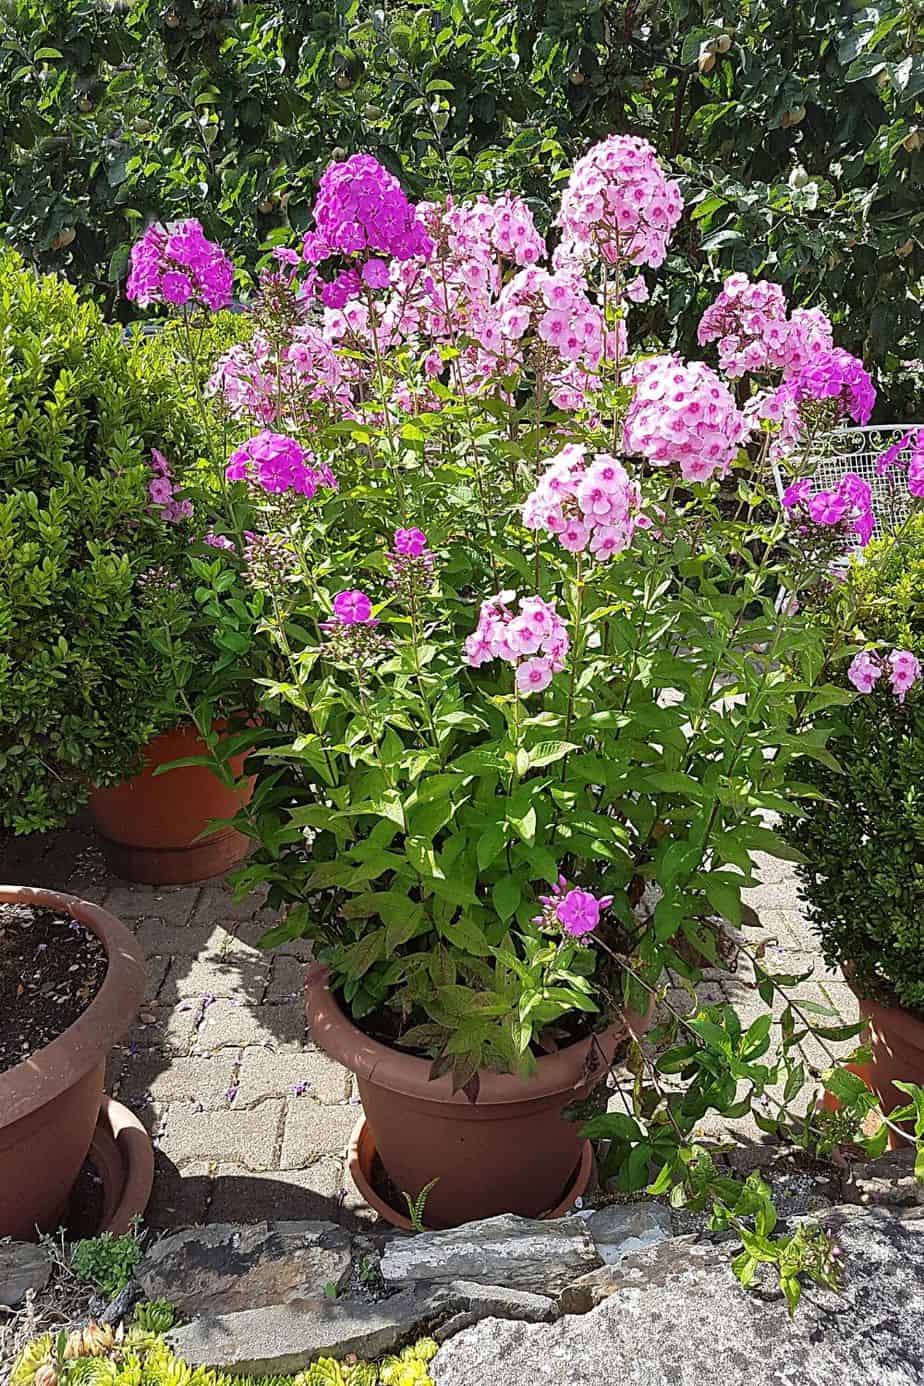 Phlox Paniculata requires moderate to full sun coverage, which a plant can get when you grow it in the west-facing side of the house